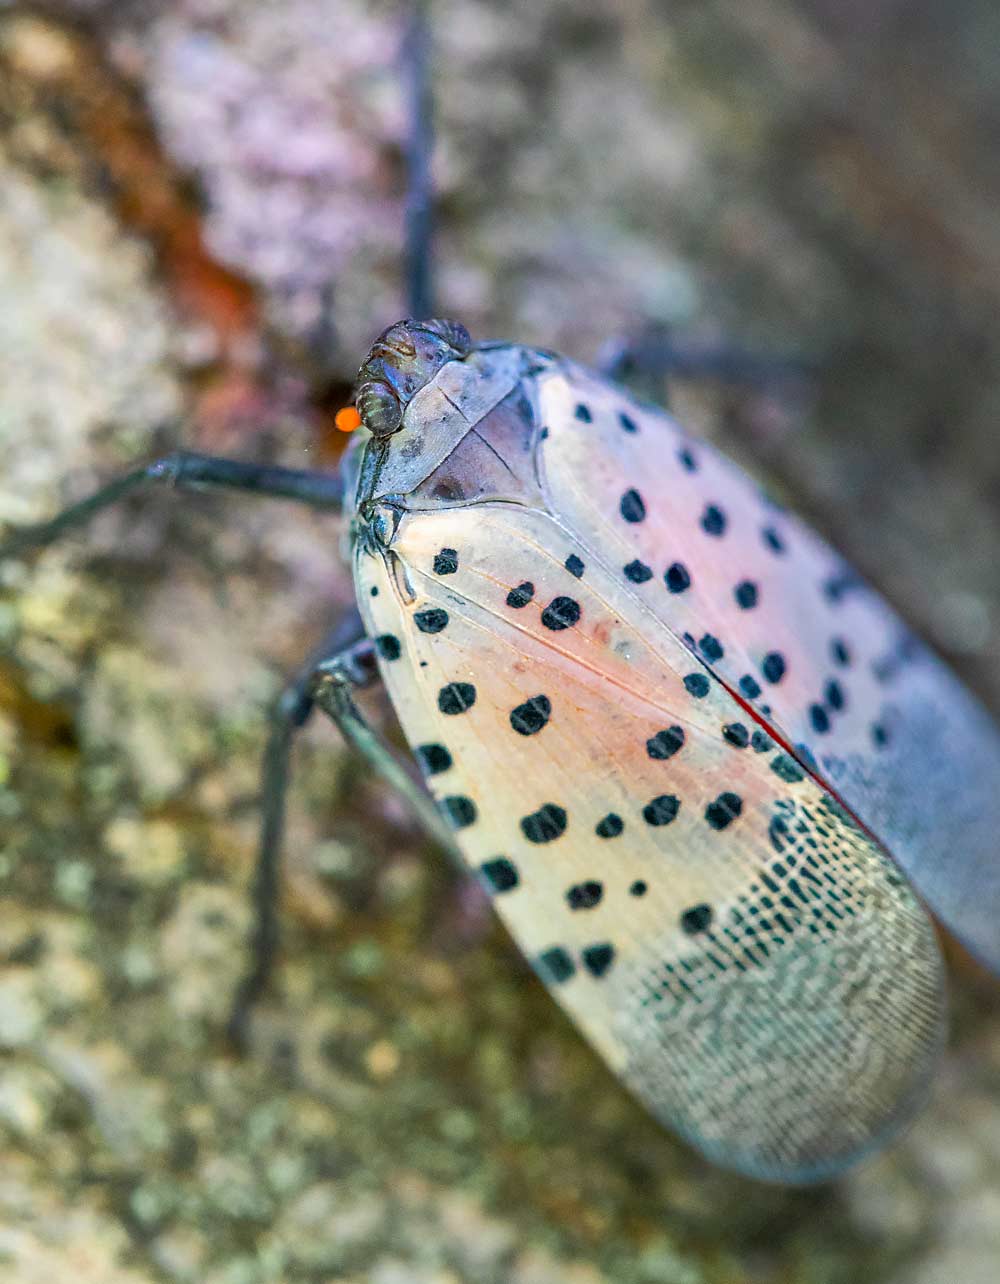 A spotted lanternfly in a Pennsylvania orchard in September 2021. The invasive pest is spreading outward from its Eastern Pennsylvania epicenter. (TJ Mullinax/Good Fruit Grower)